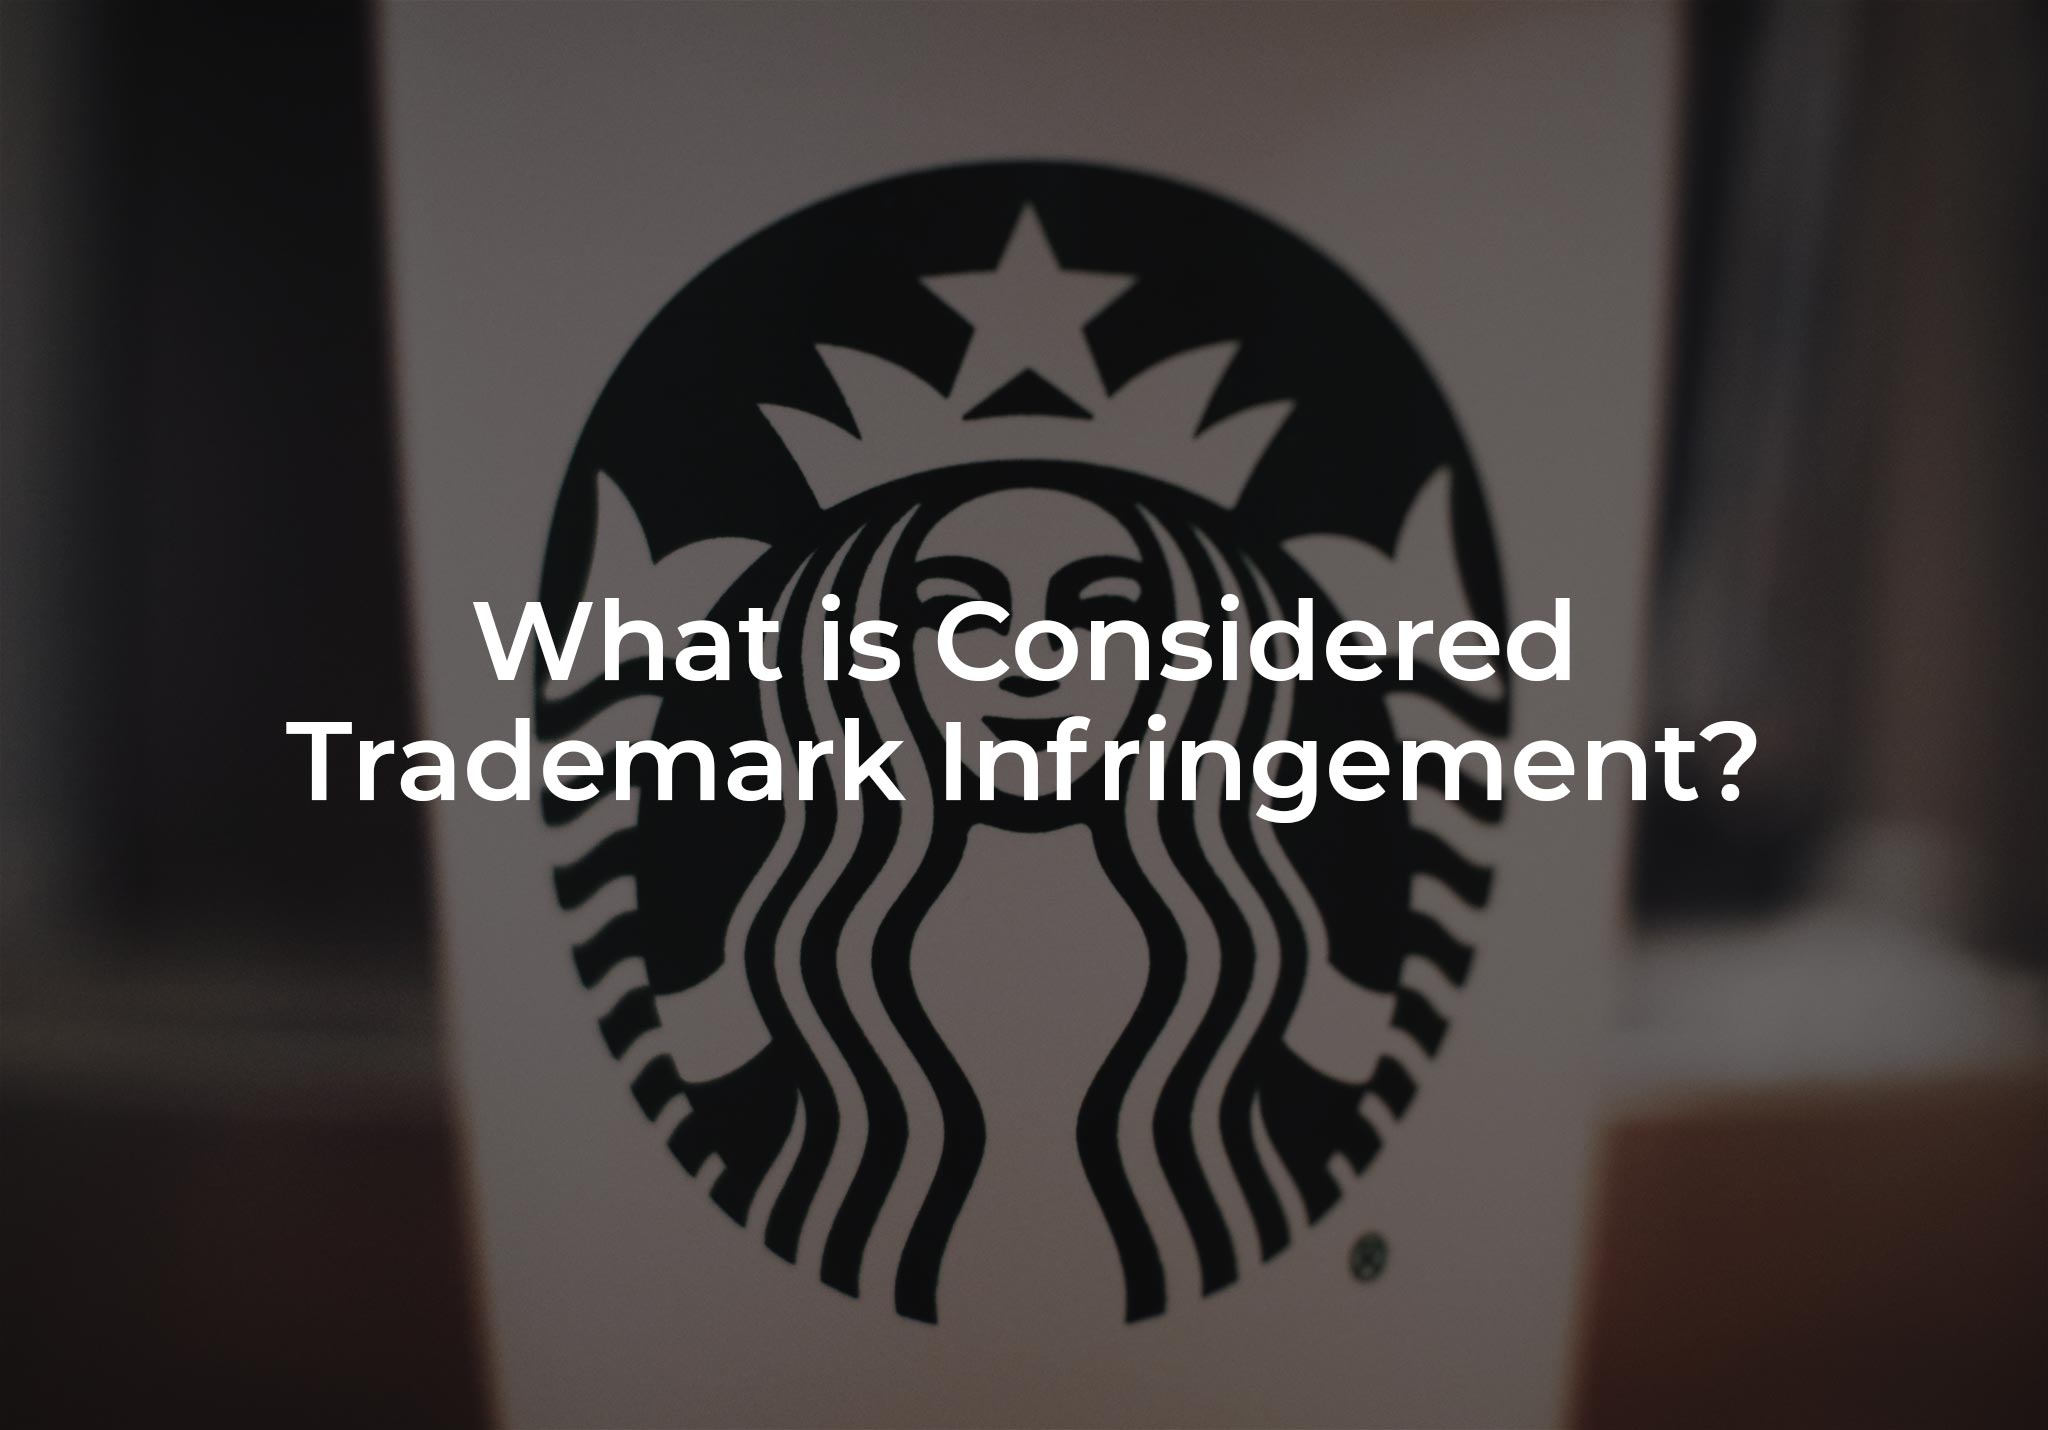 What is Considered Trademark Infringement?